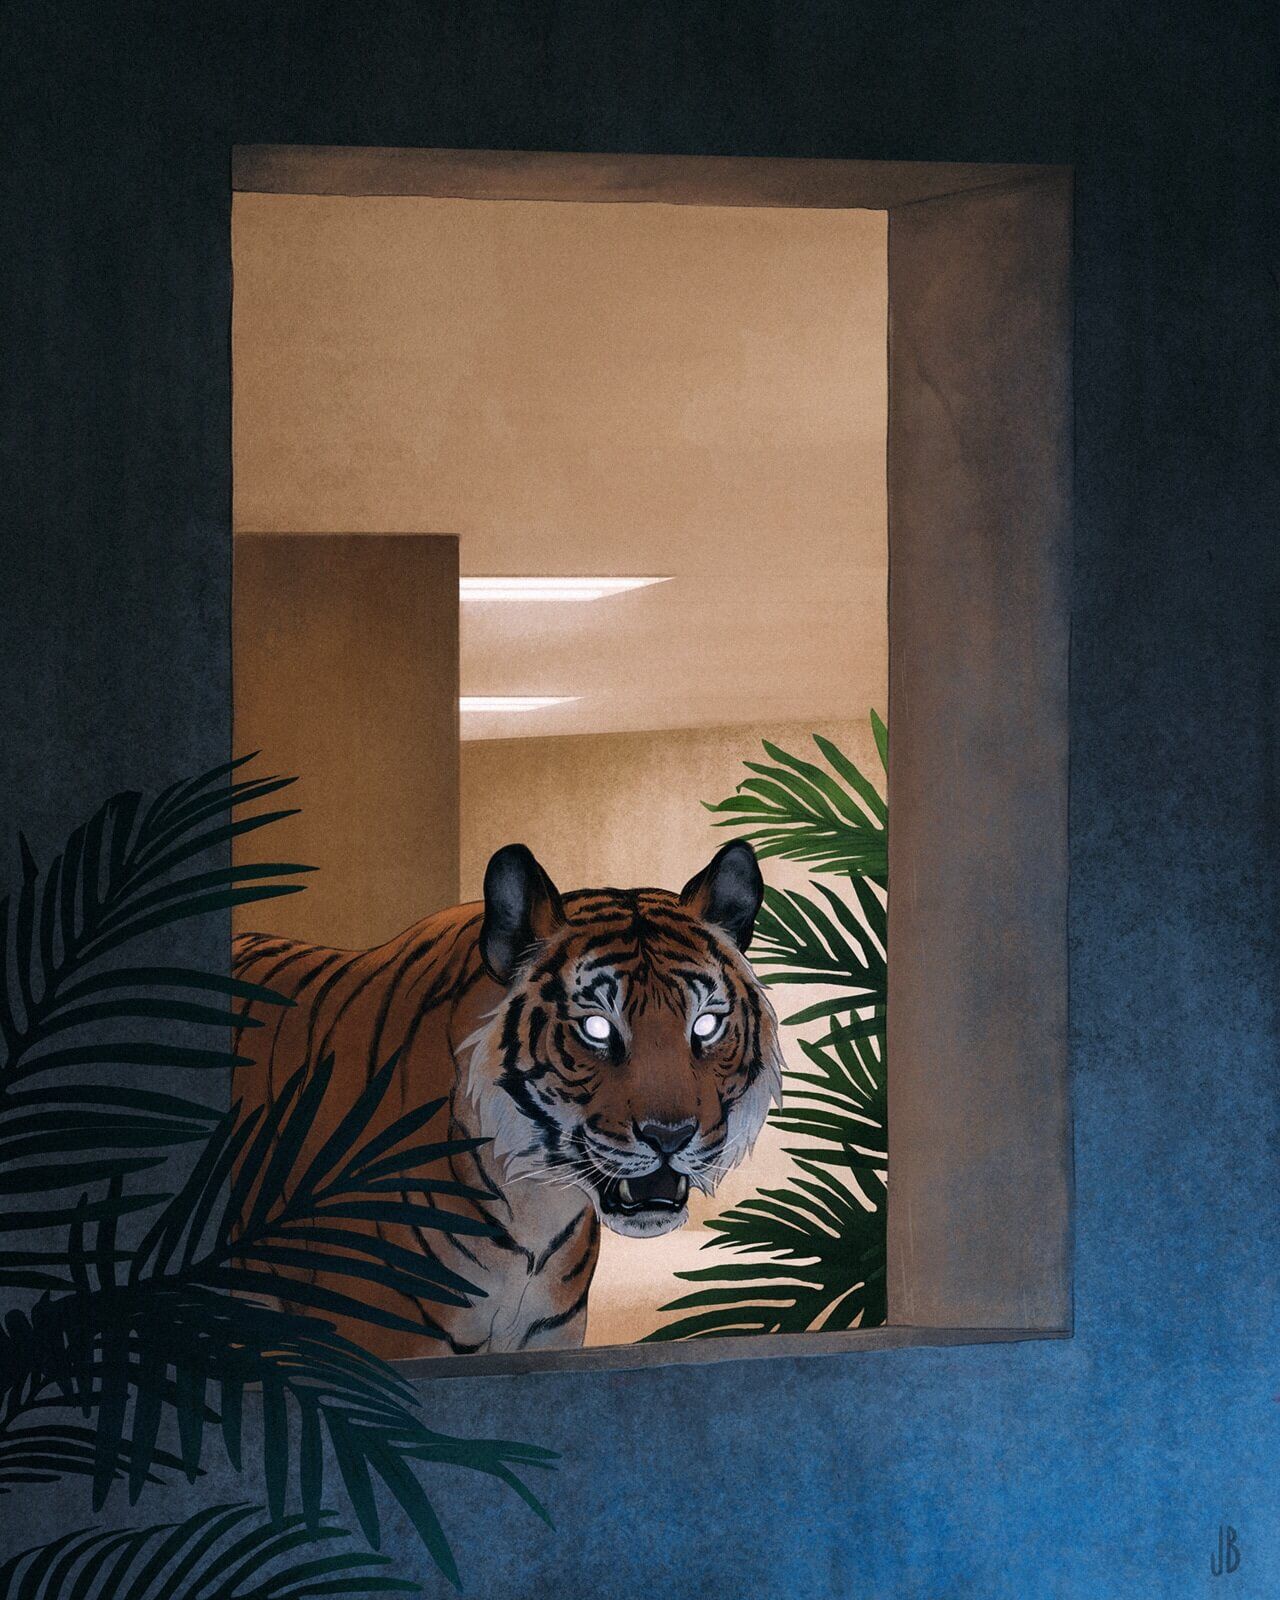 A tiger peers out from a window surrounded by palm leaves. - Tiger